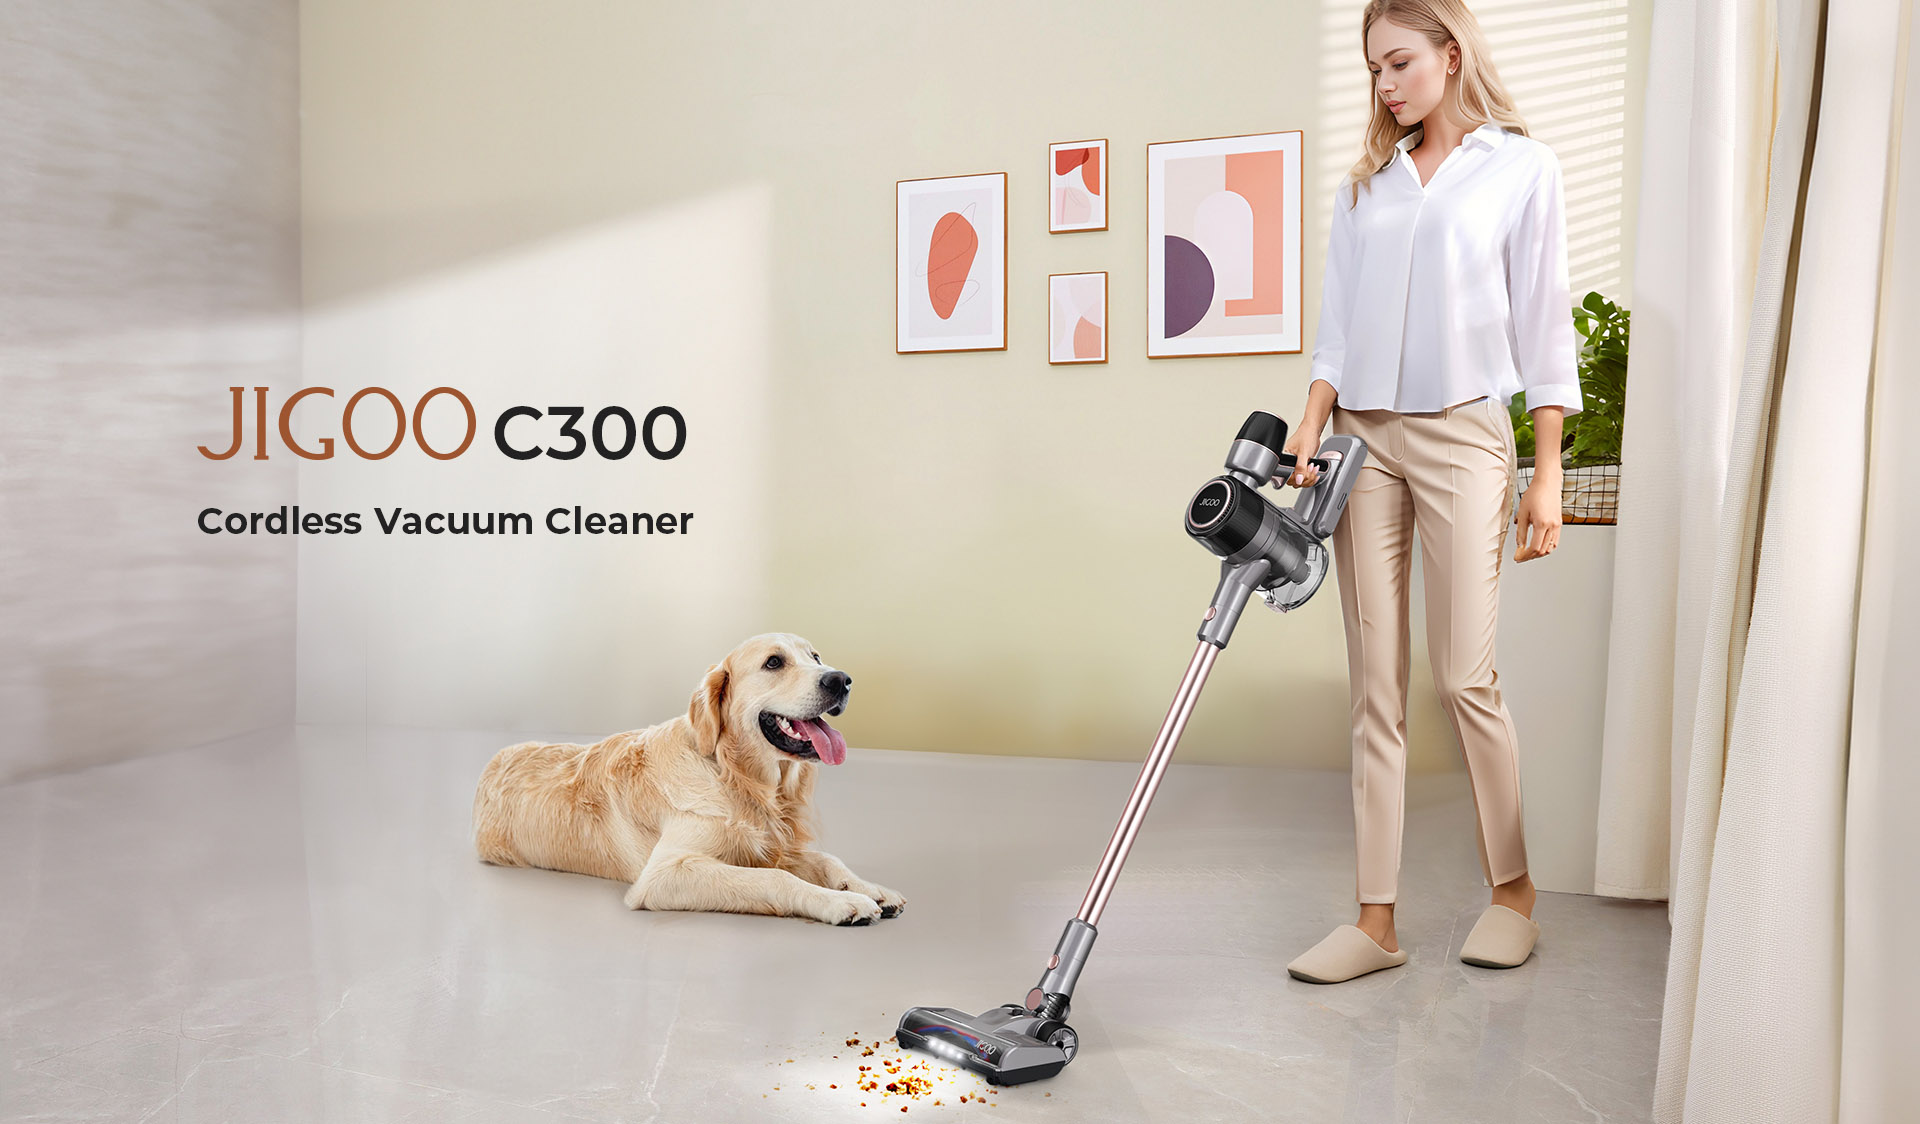 JIGOO C300 Cordless Vacuum Cleaner, 30KPa Suction, 400W Motor, 1.2L Dust Cup, 5-Stage Filtration, Up to 45 Mins Runtime, 2000mAh Removable Battery, LED Touch Screen, Rotatable Metal Tube